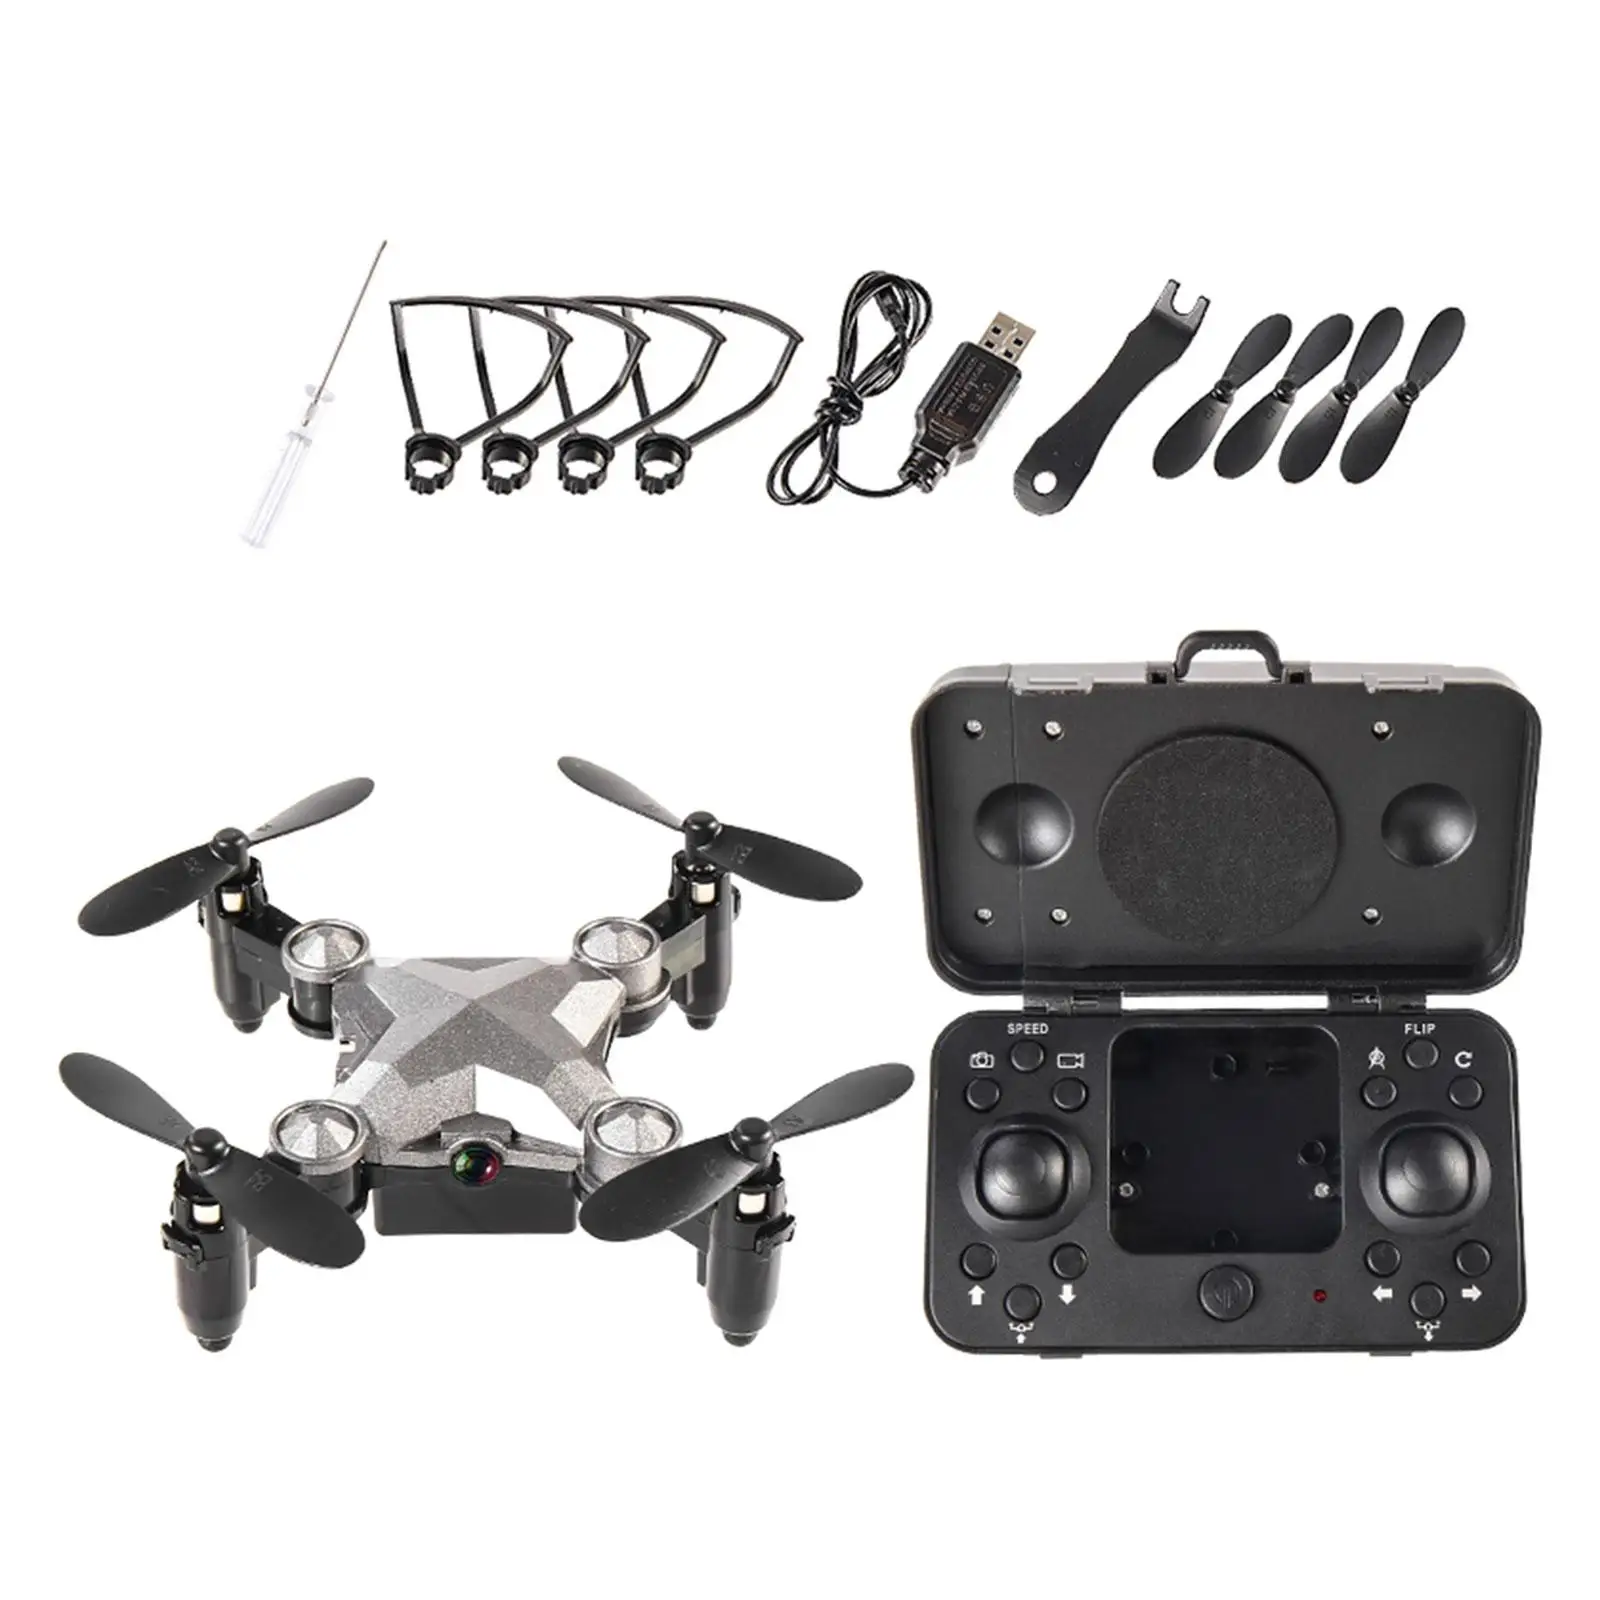 Mini Drone 4 Channels 360 Degree Flipping 720 Camera Remote Control Quad RC Airplane for Birthday Gift Helicopter Toys Children